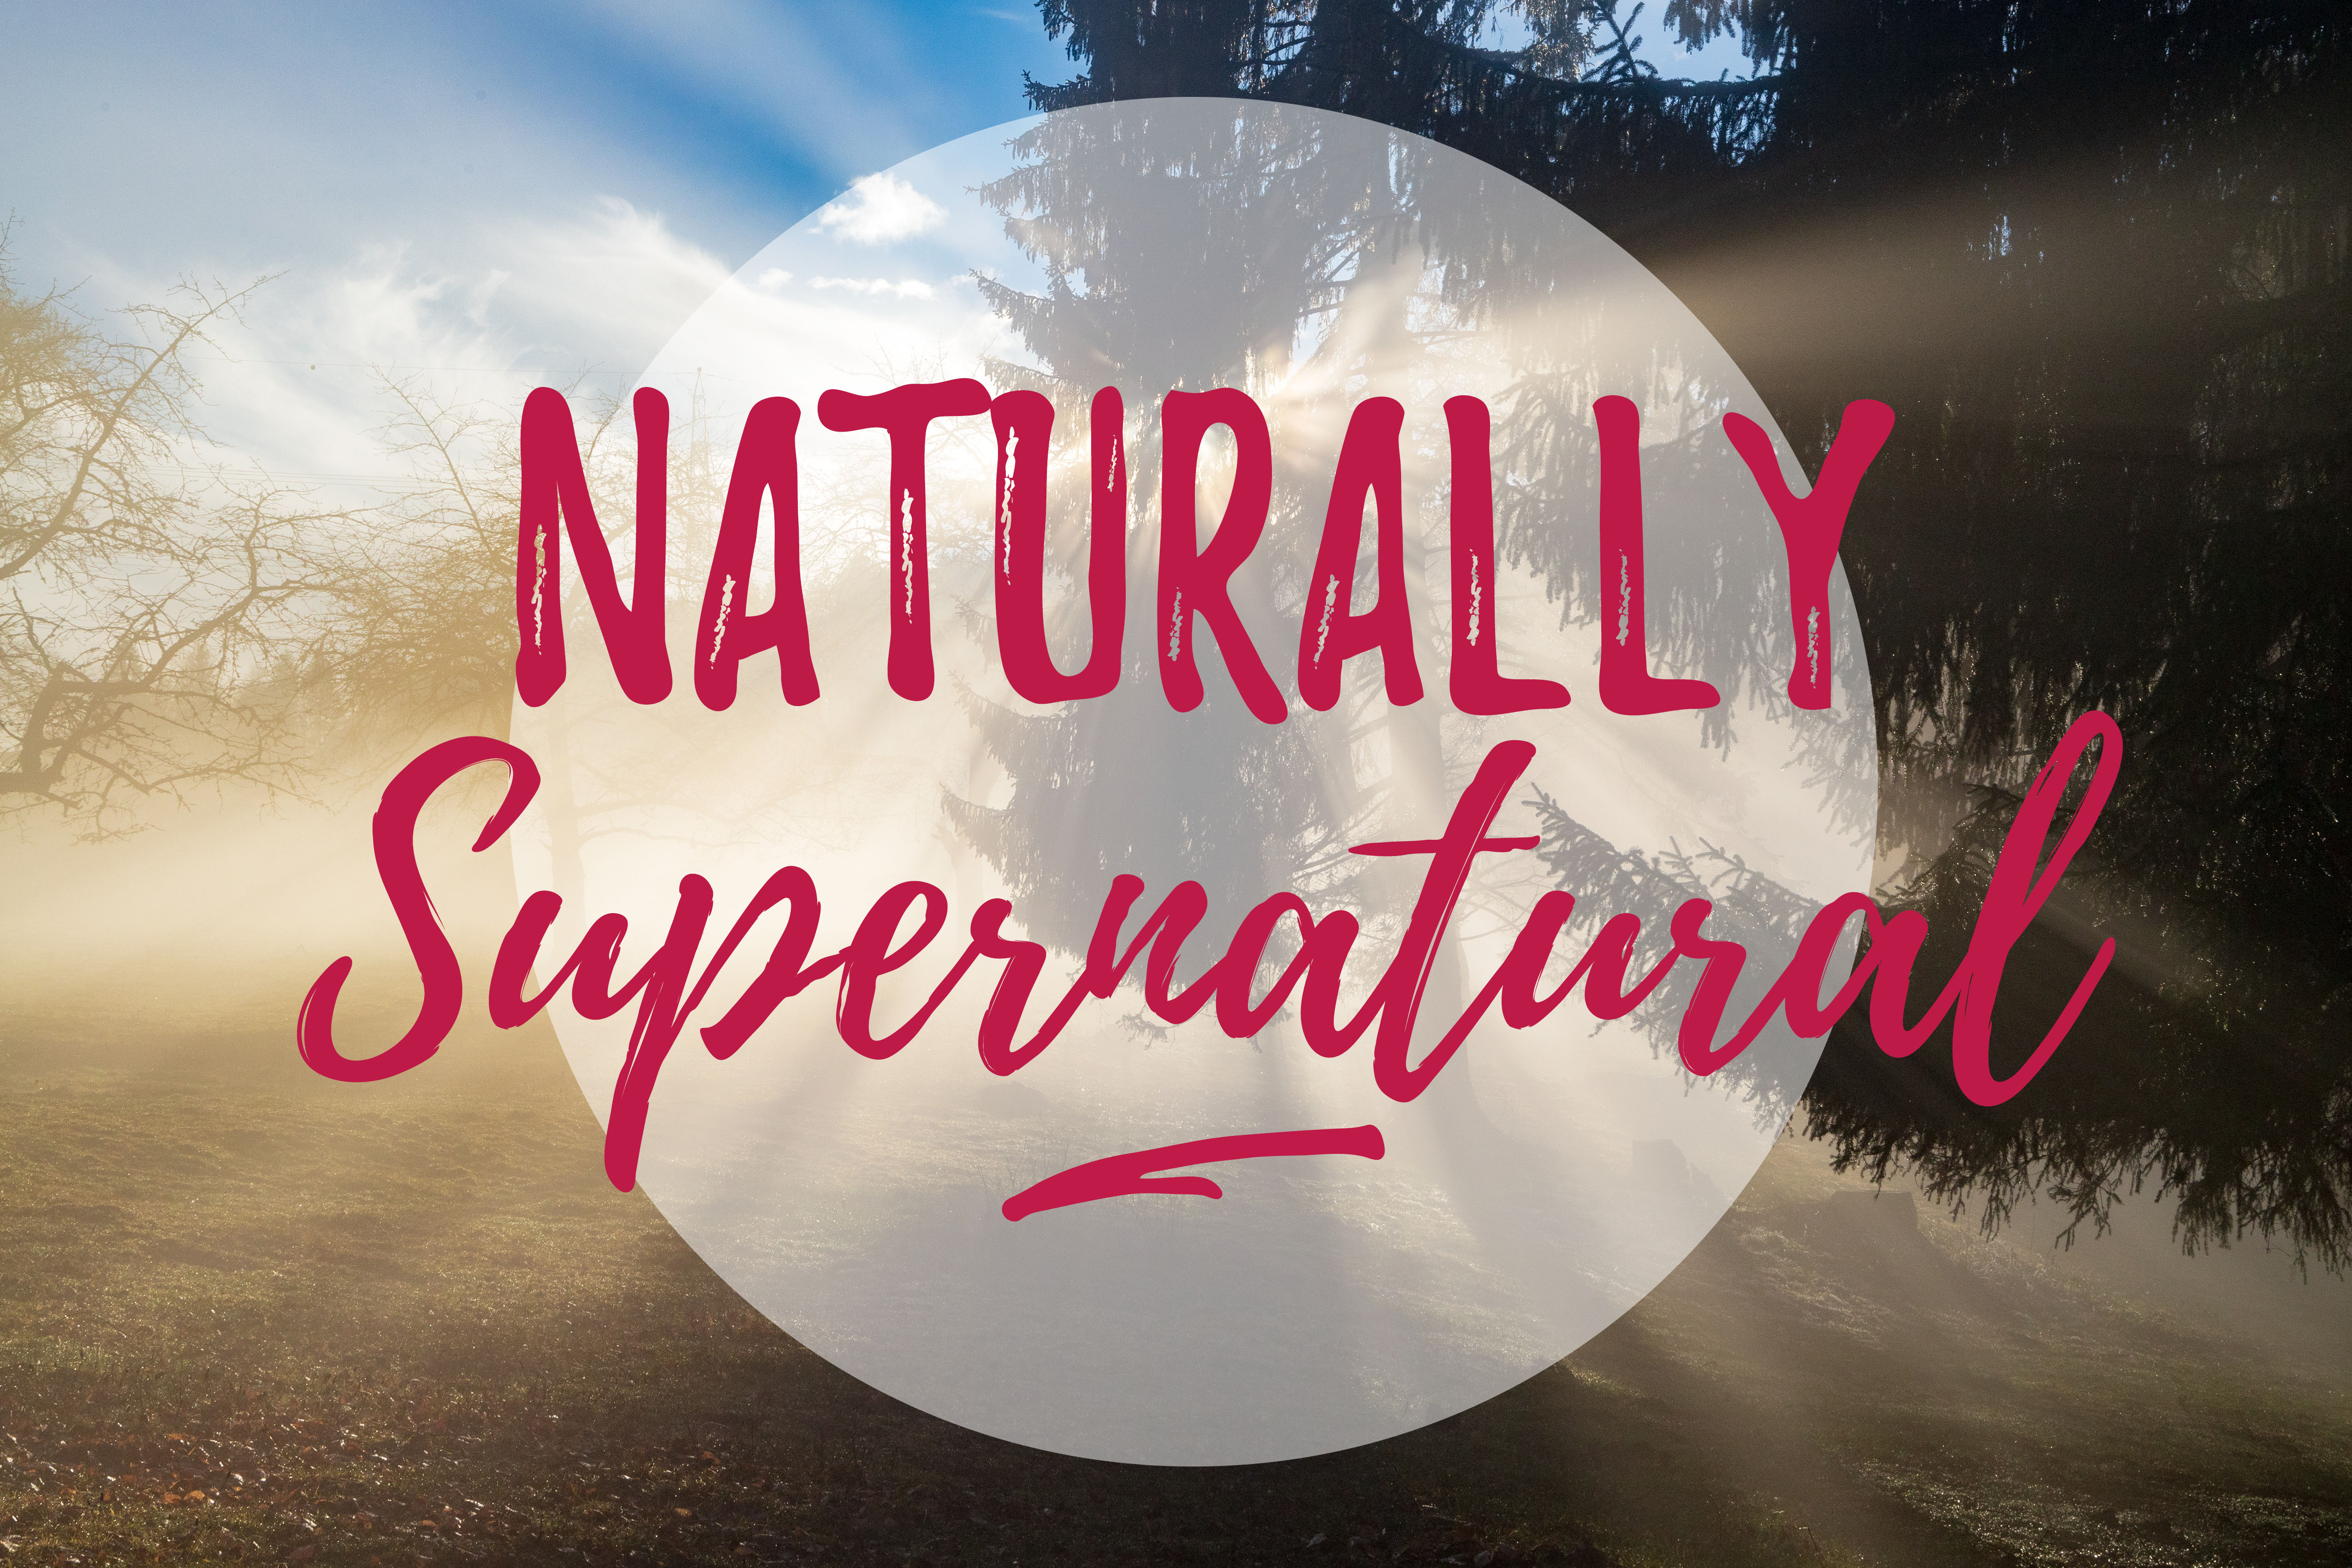 [Naturally Supernatural] Seeing The Big Picture